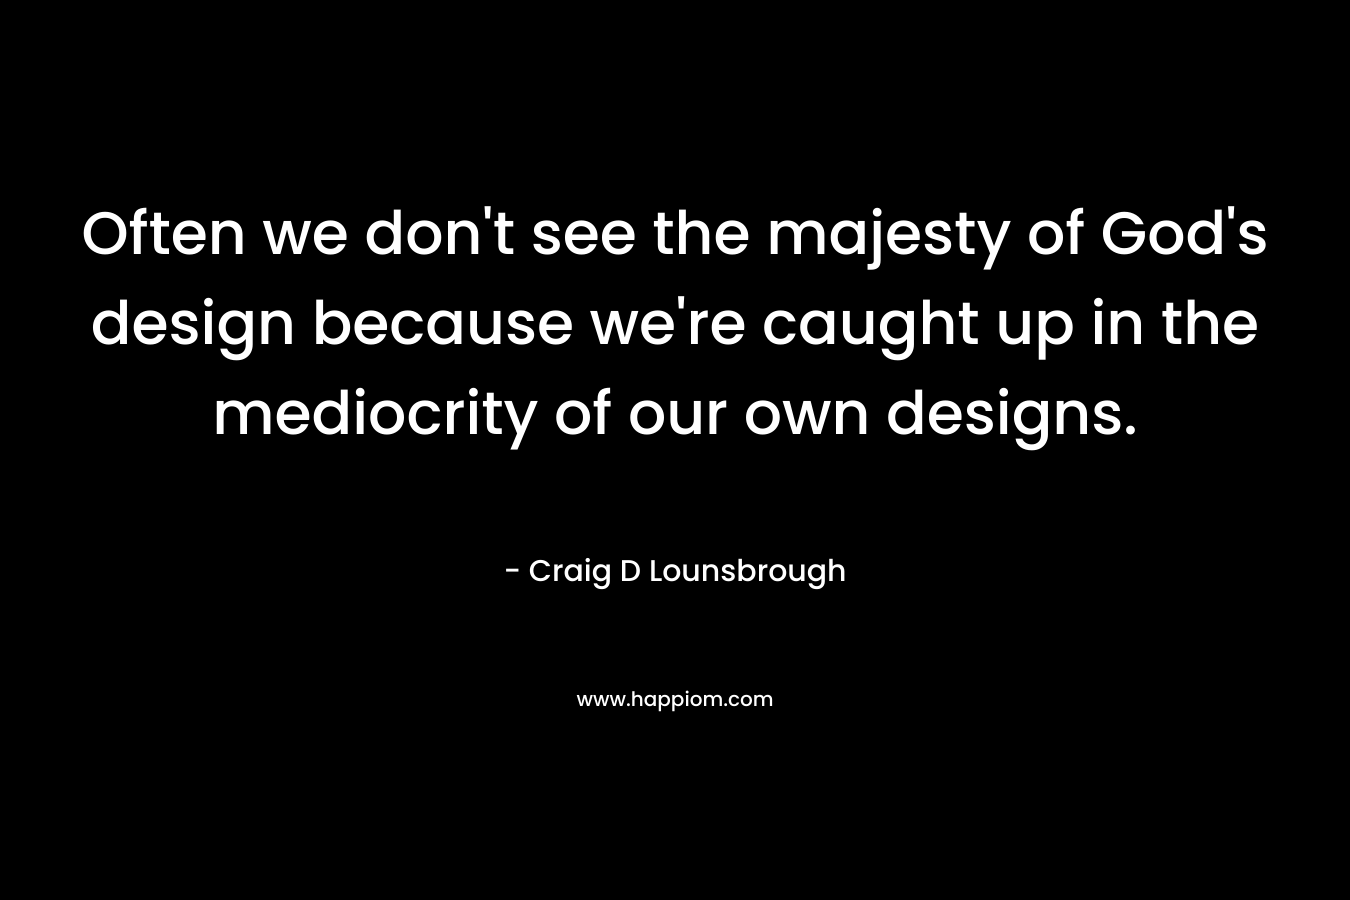 Often we don't see the majesty of God's design because we're caught up in the mediocrity of our own designs.